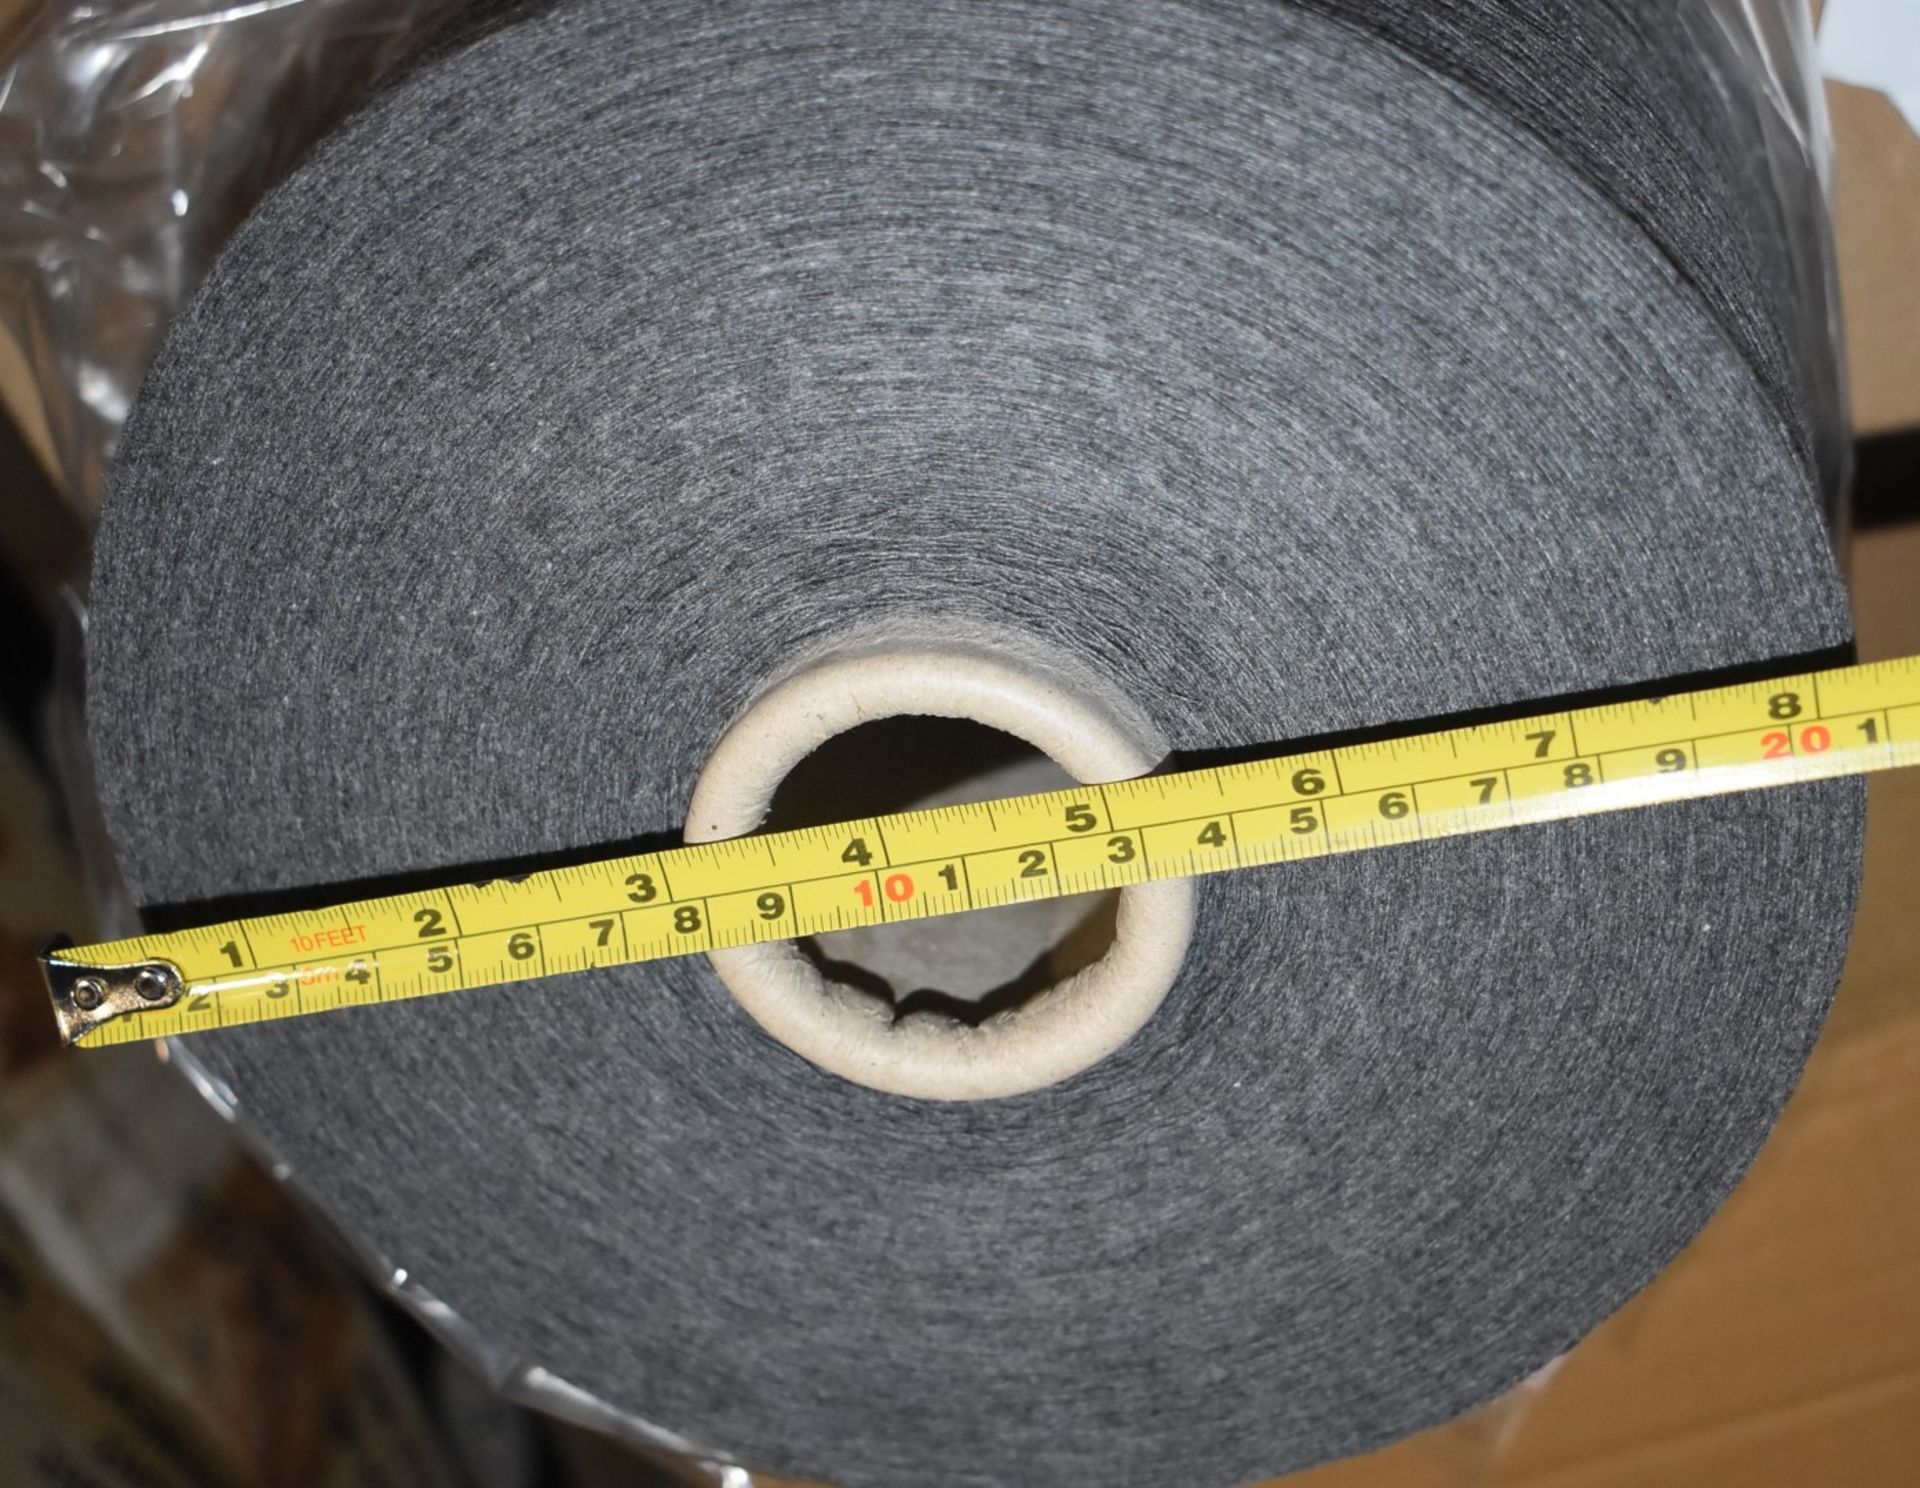 18 x Cones of 1/13 MicroCotton Knitting Yarn - Mid Grey - Approx Weight: 2,500g - New Stock ABL Yarn - Image 11 of 12